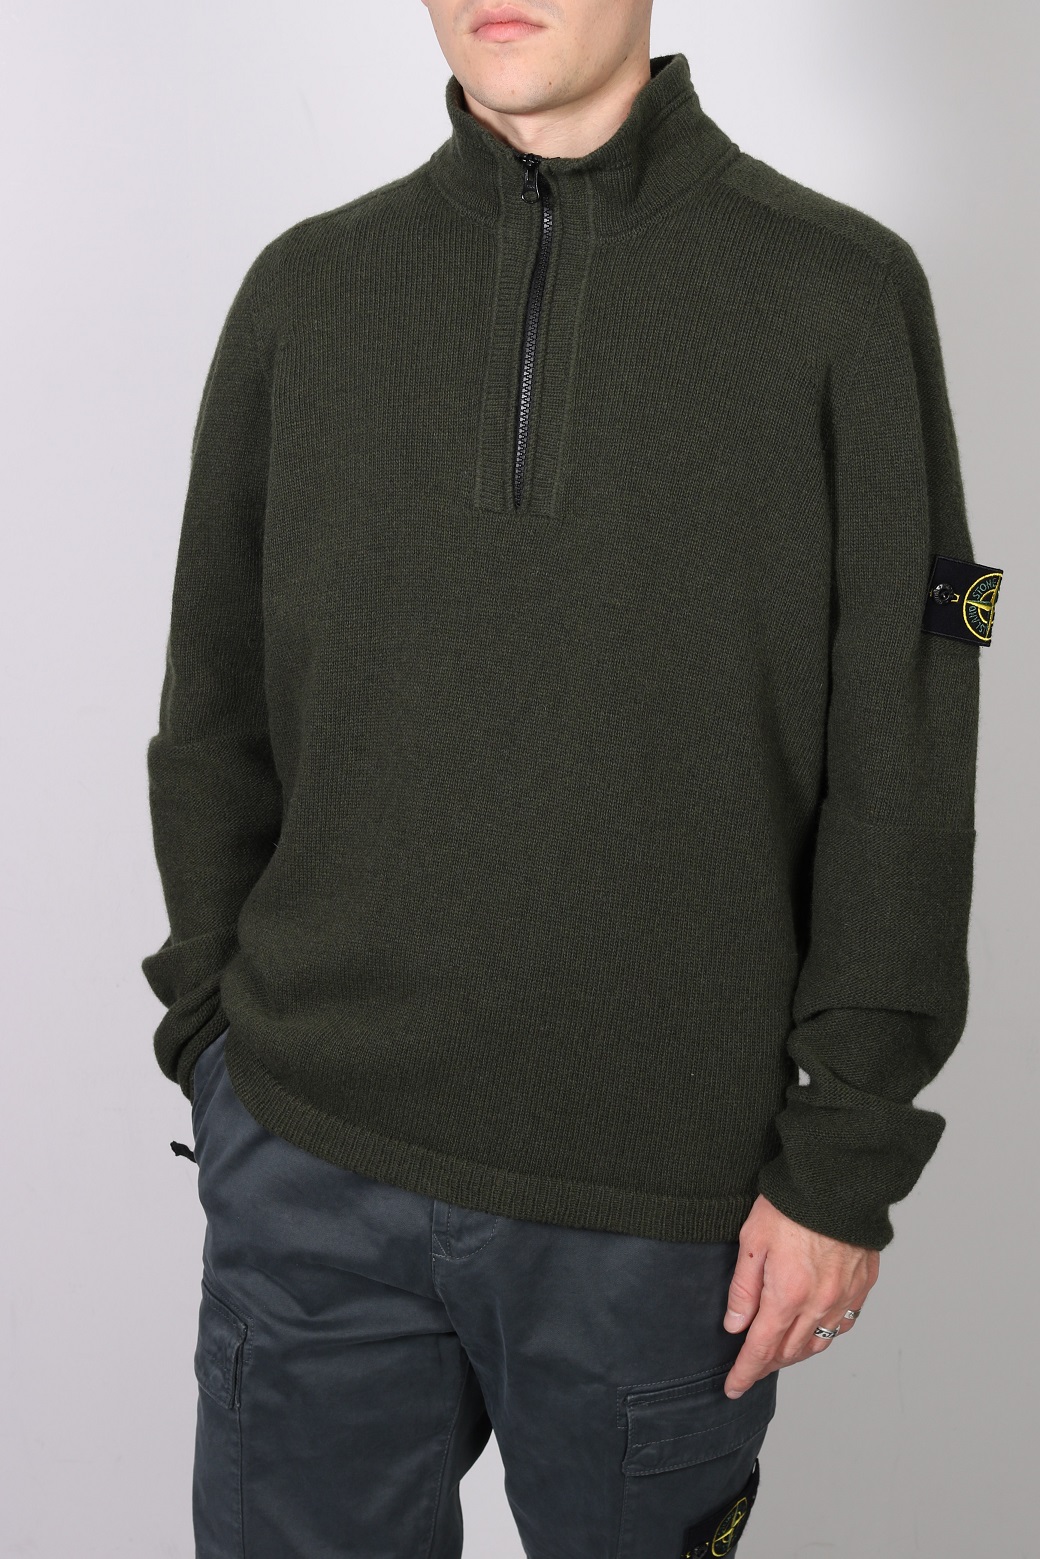 STONE ISLAND Halfzip Knit Sweater in Olive